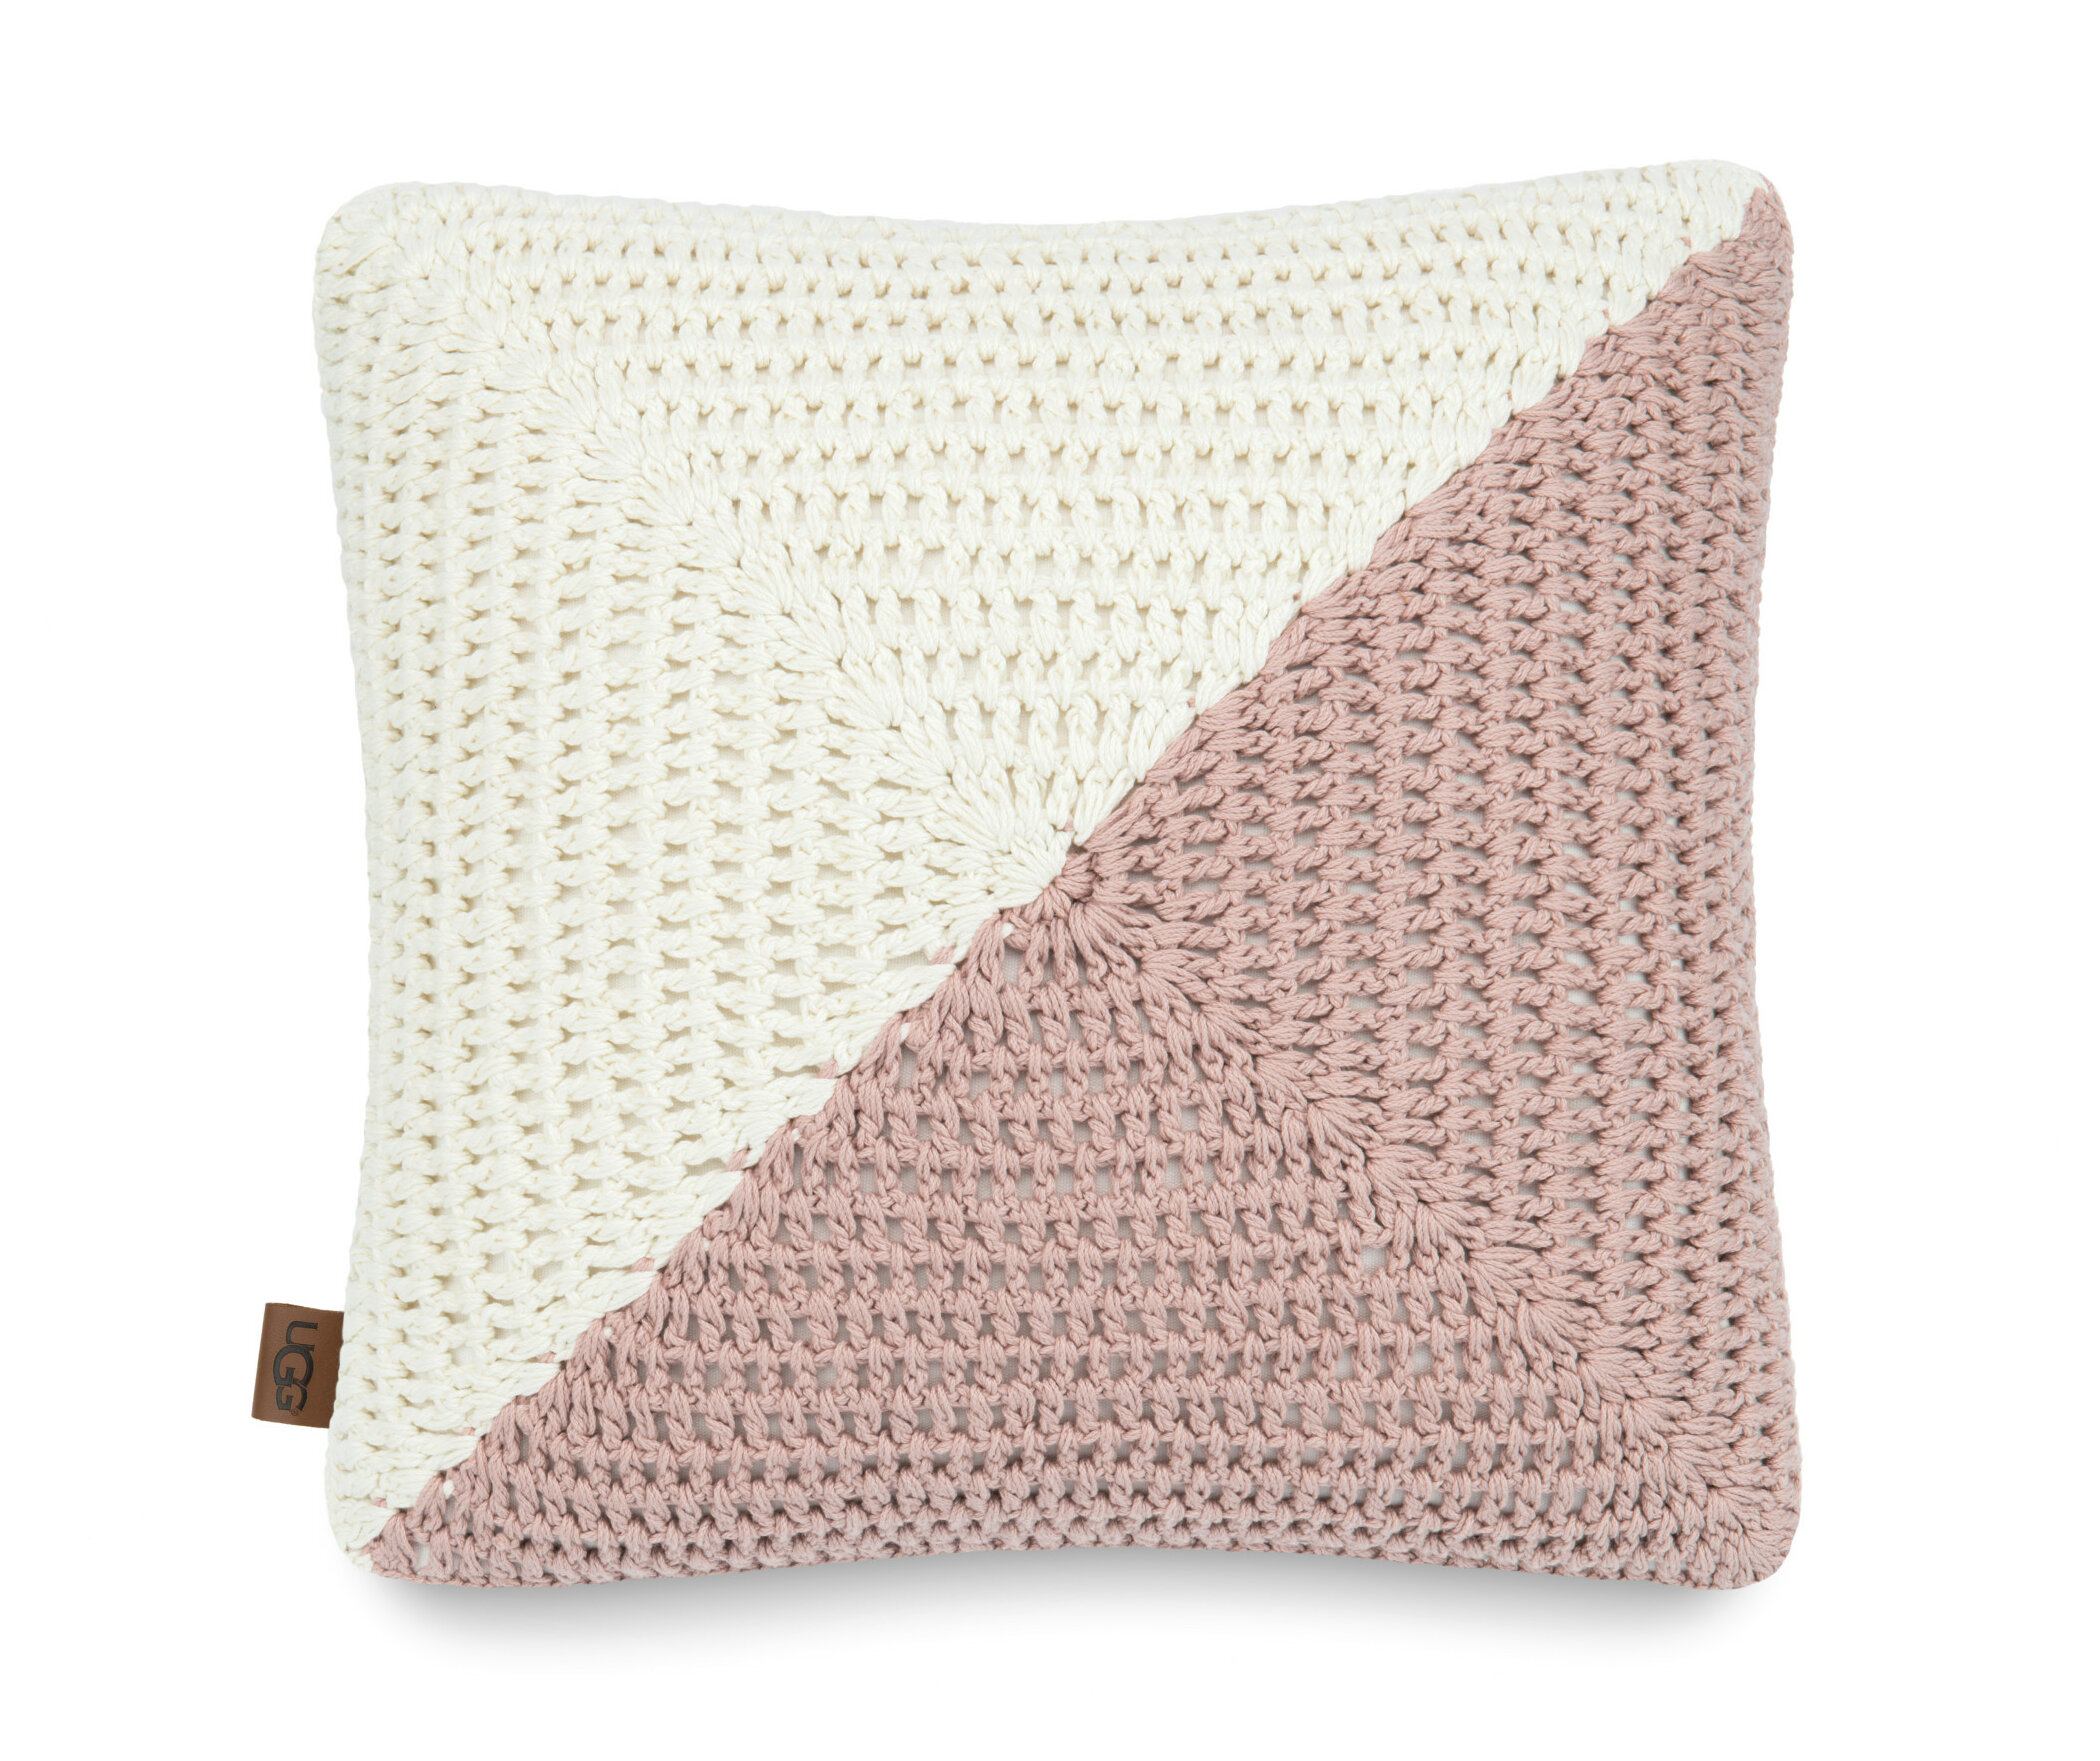 ugg pillows and throws